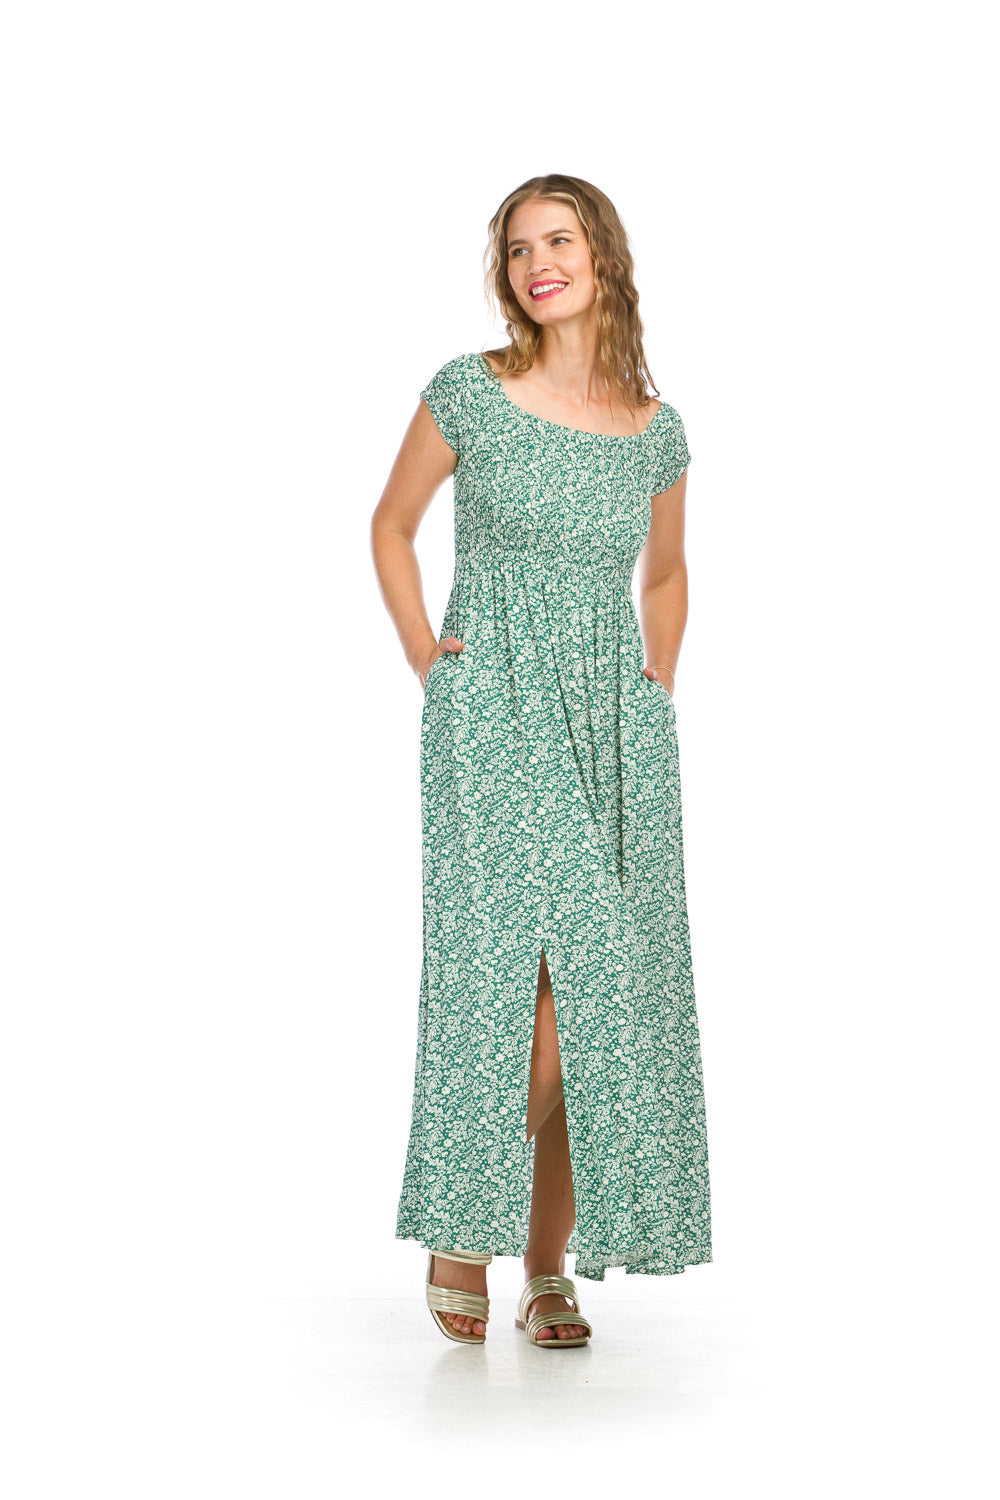 PD16654 GREEN Floral Smocked OTS Maxi Dress with Pockets